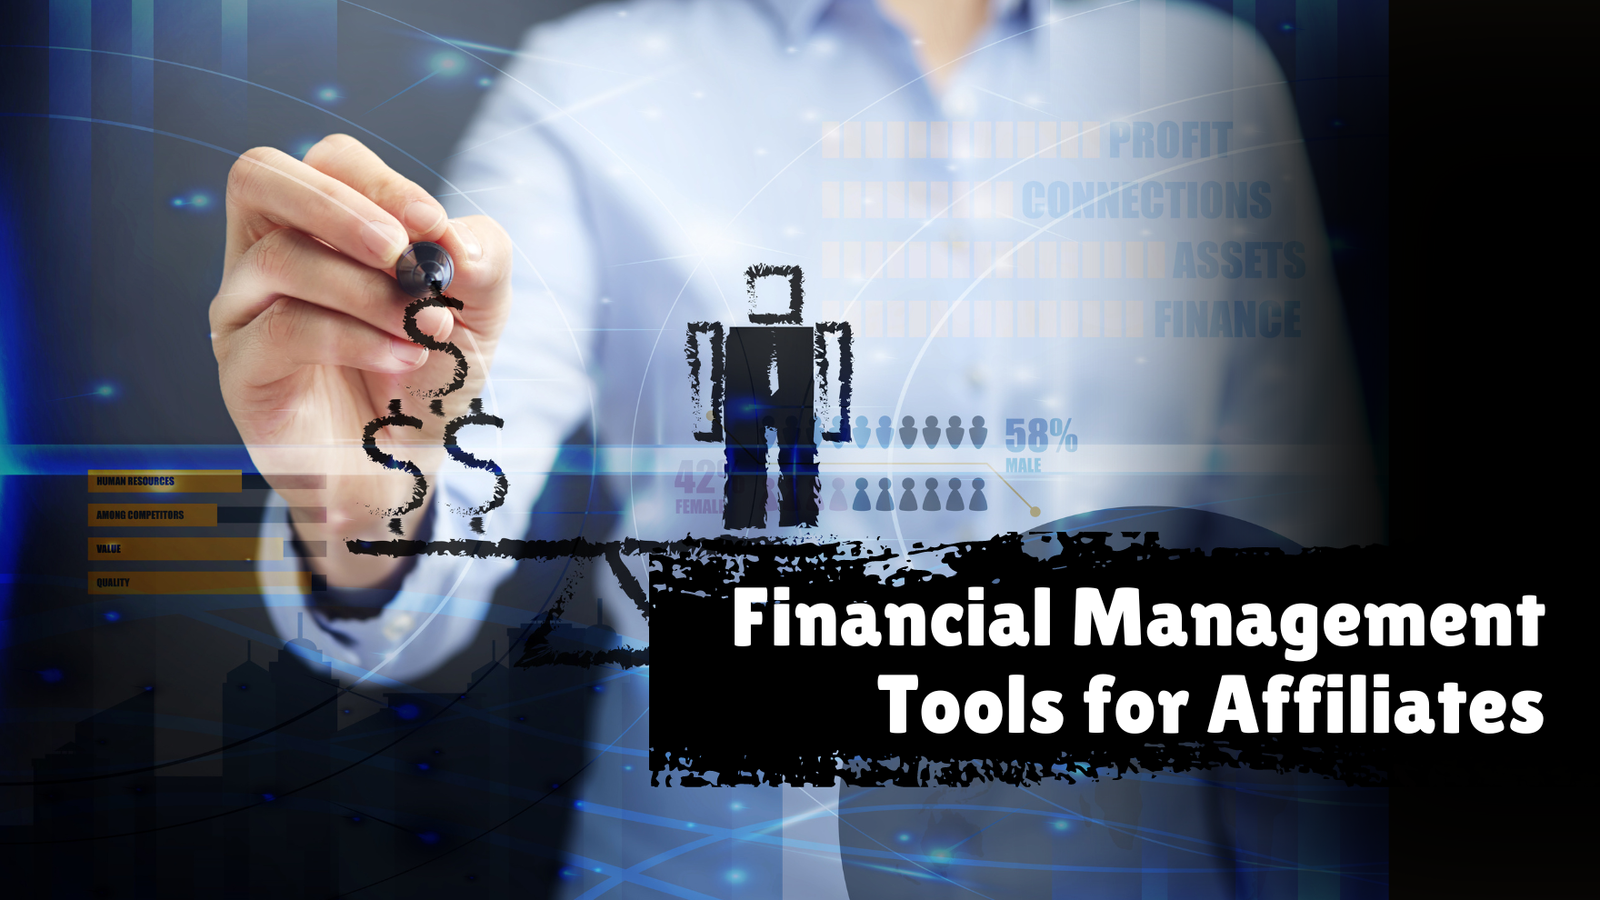 Financial Management Tools for Affiliates